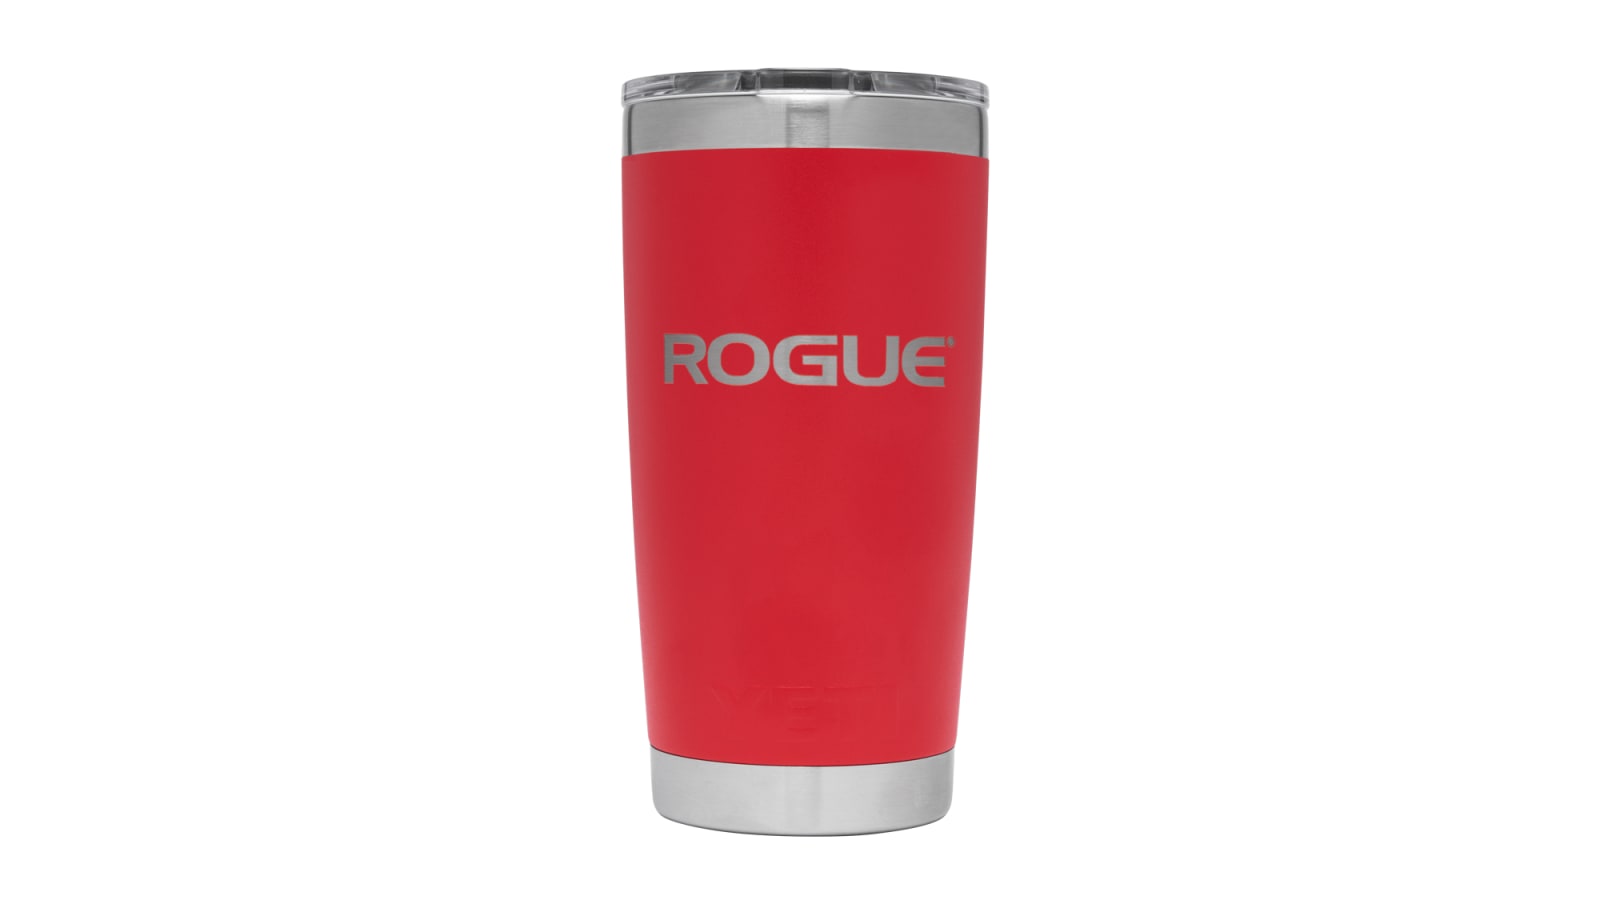 https://assets.roguefitness.com/f_auto,q_auto,c_limit,w_1600,b_rgb:ffffff/catalog/Gear%20and%20Accessories/Accessories/Shakers%20and%20Bottles/YT0098/YT0098-H_wfo6dl.png